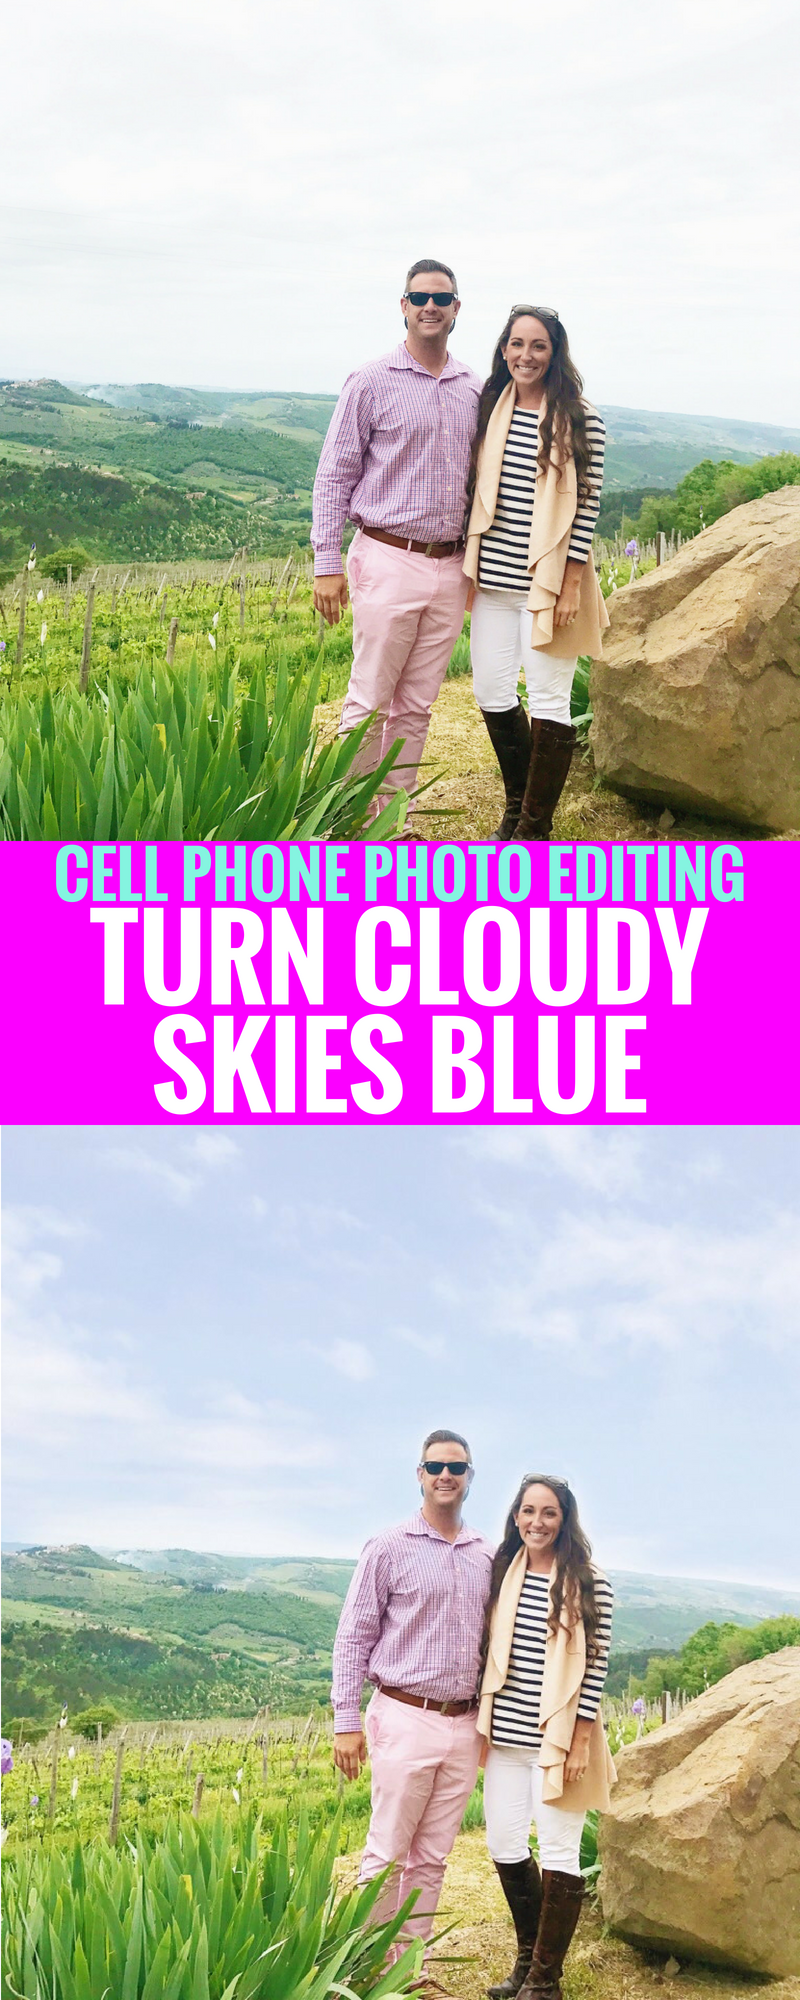 How To Make A Cloudy Sky Blue Using Snapped - Snapseed Photo Editing - Editing Photos Using Snapseed - iPhone photo editing apps - Easy photo editing on your phone - Communikait by Kait Hanson